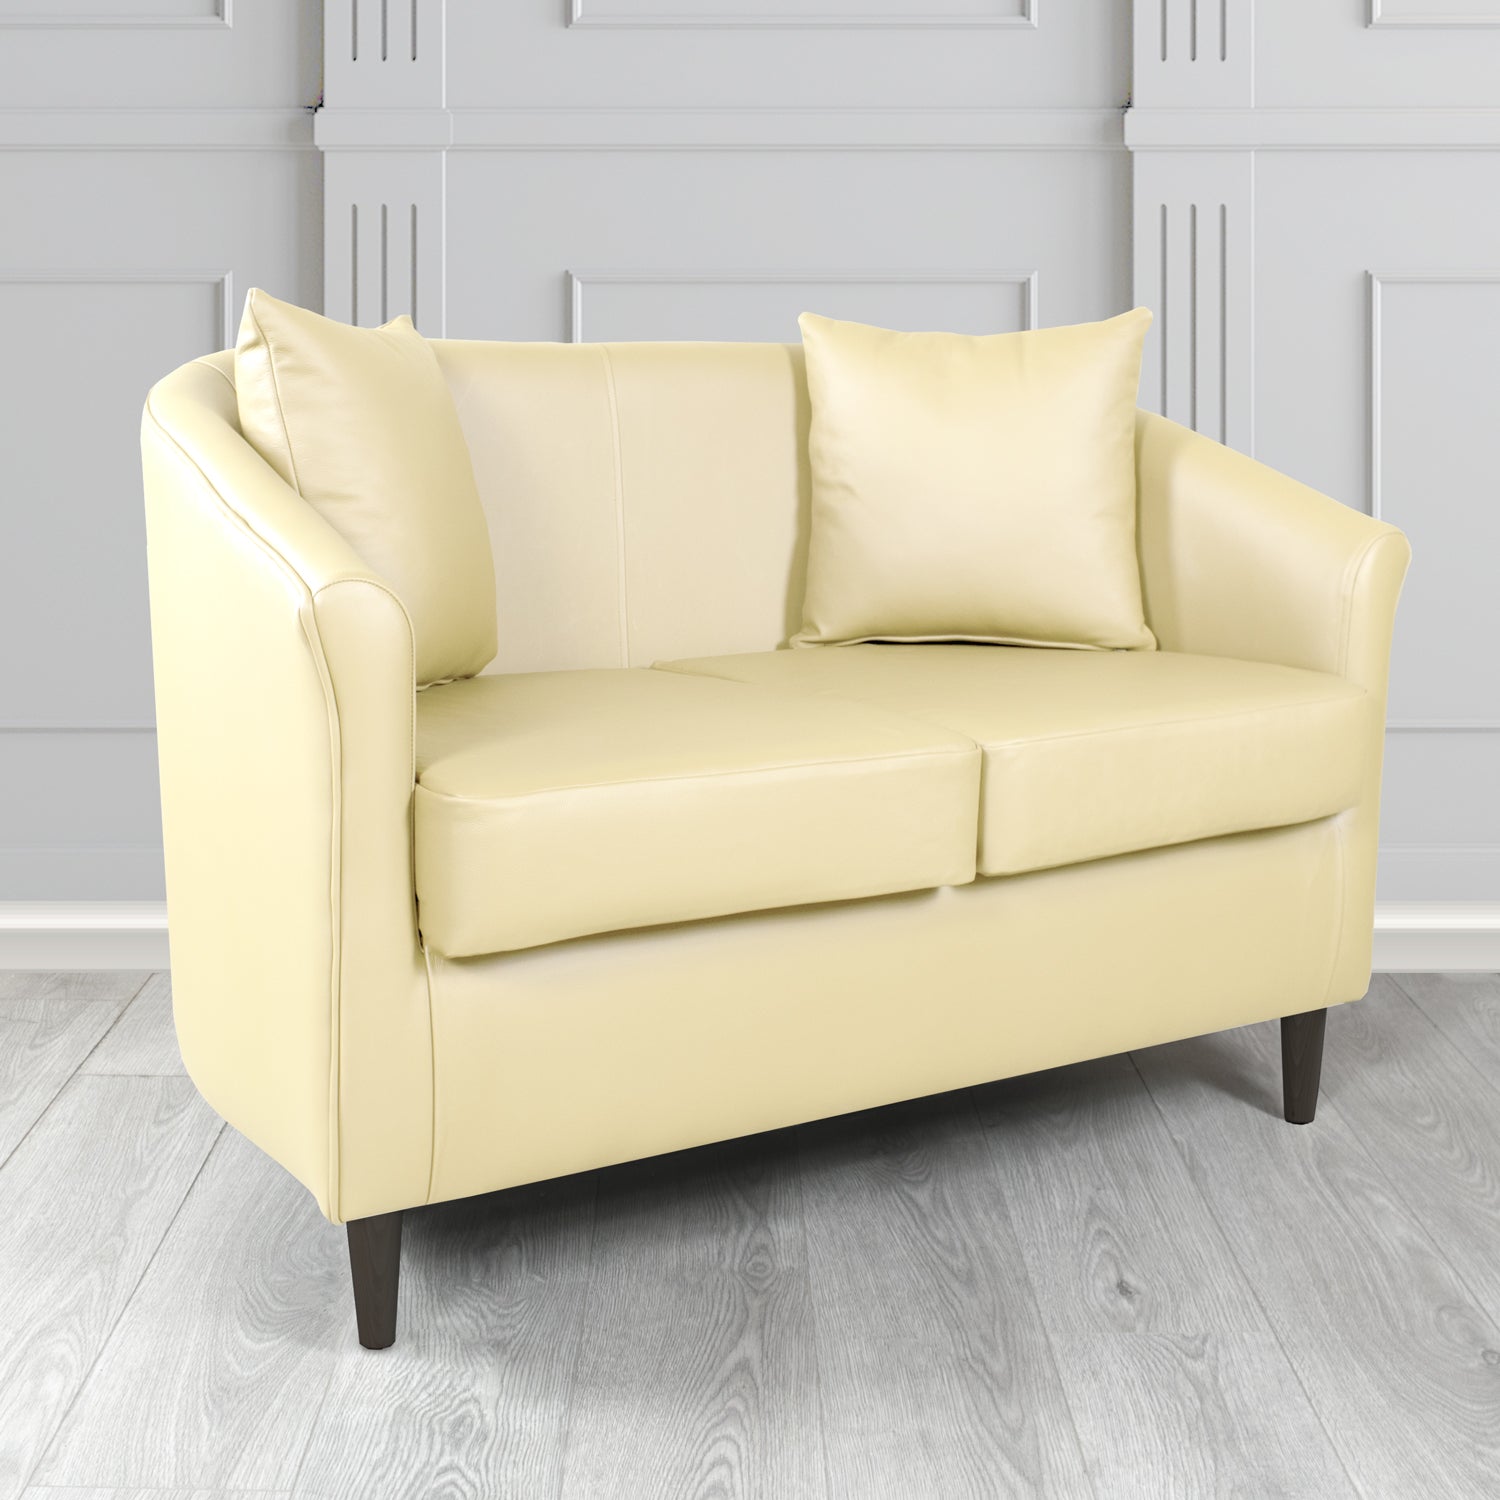 St Tropez Shelly Cream Crib 5 Genuine Leather 2 Seater Tub Sofa with Scatter Cushions - The Tub Chair Shop